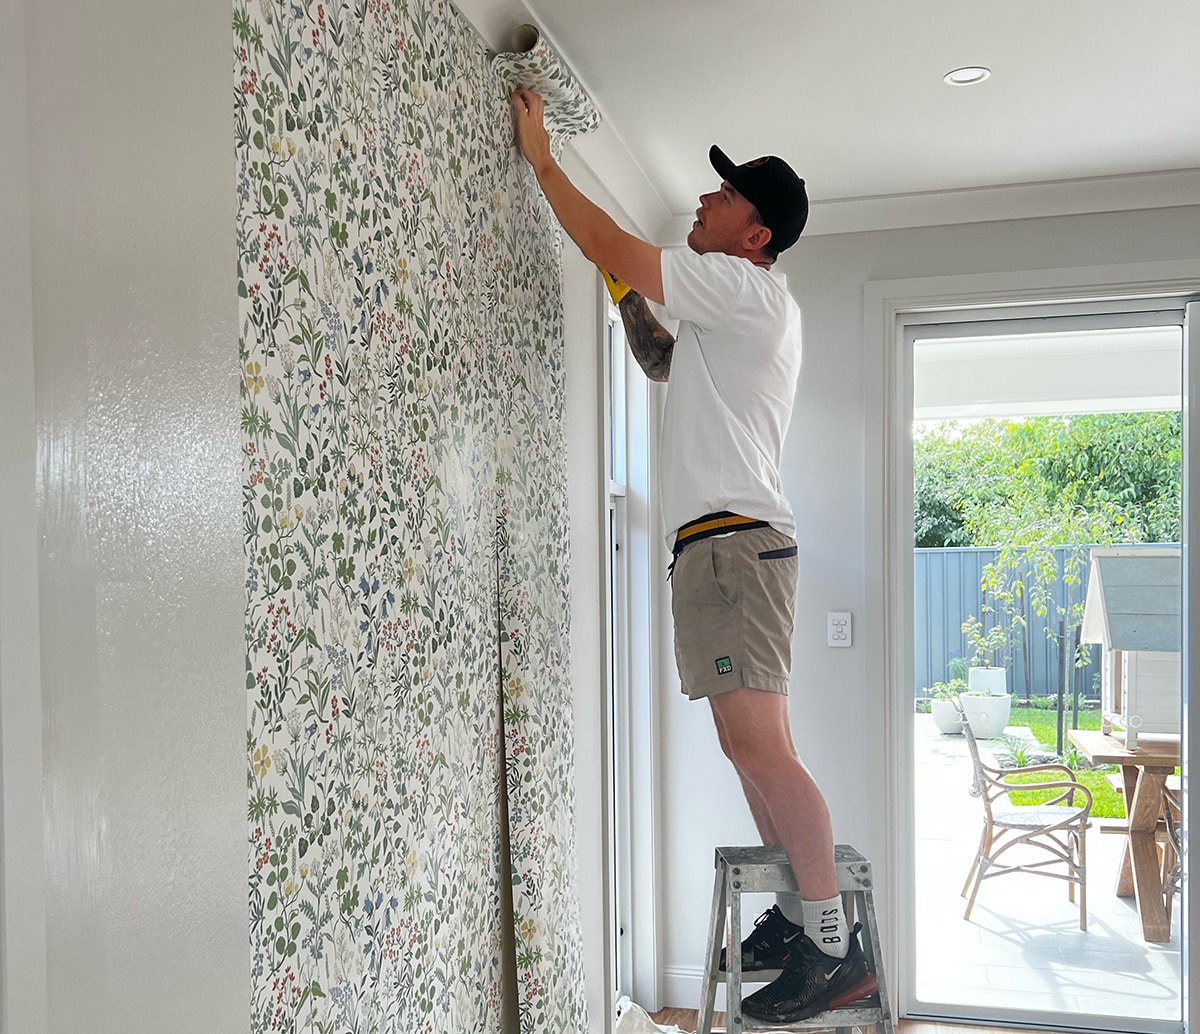 wallpaper installation in adelaide home